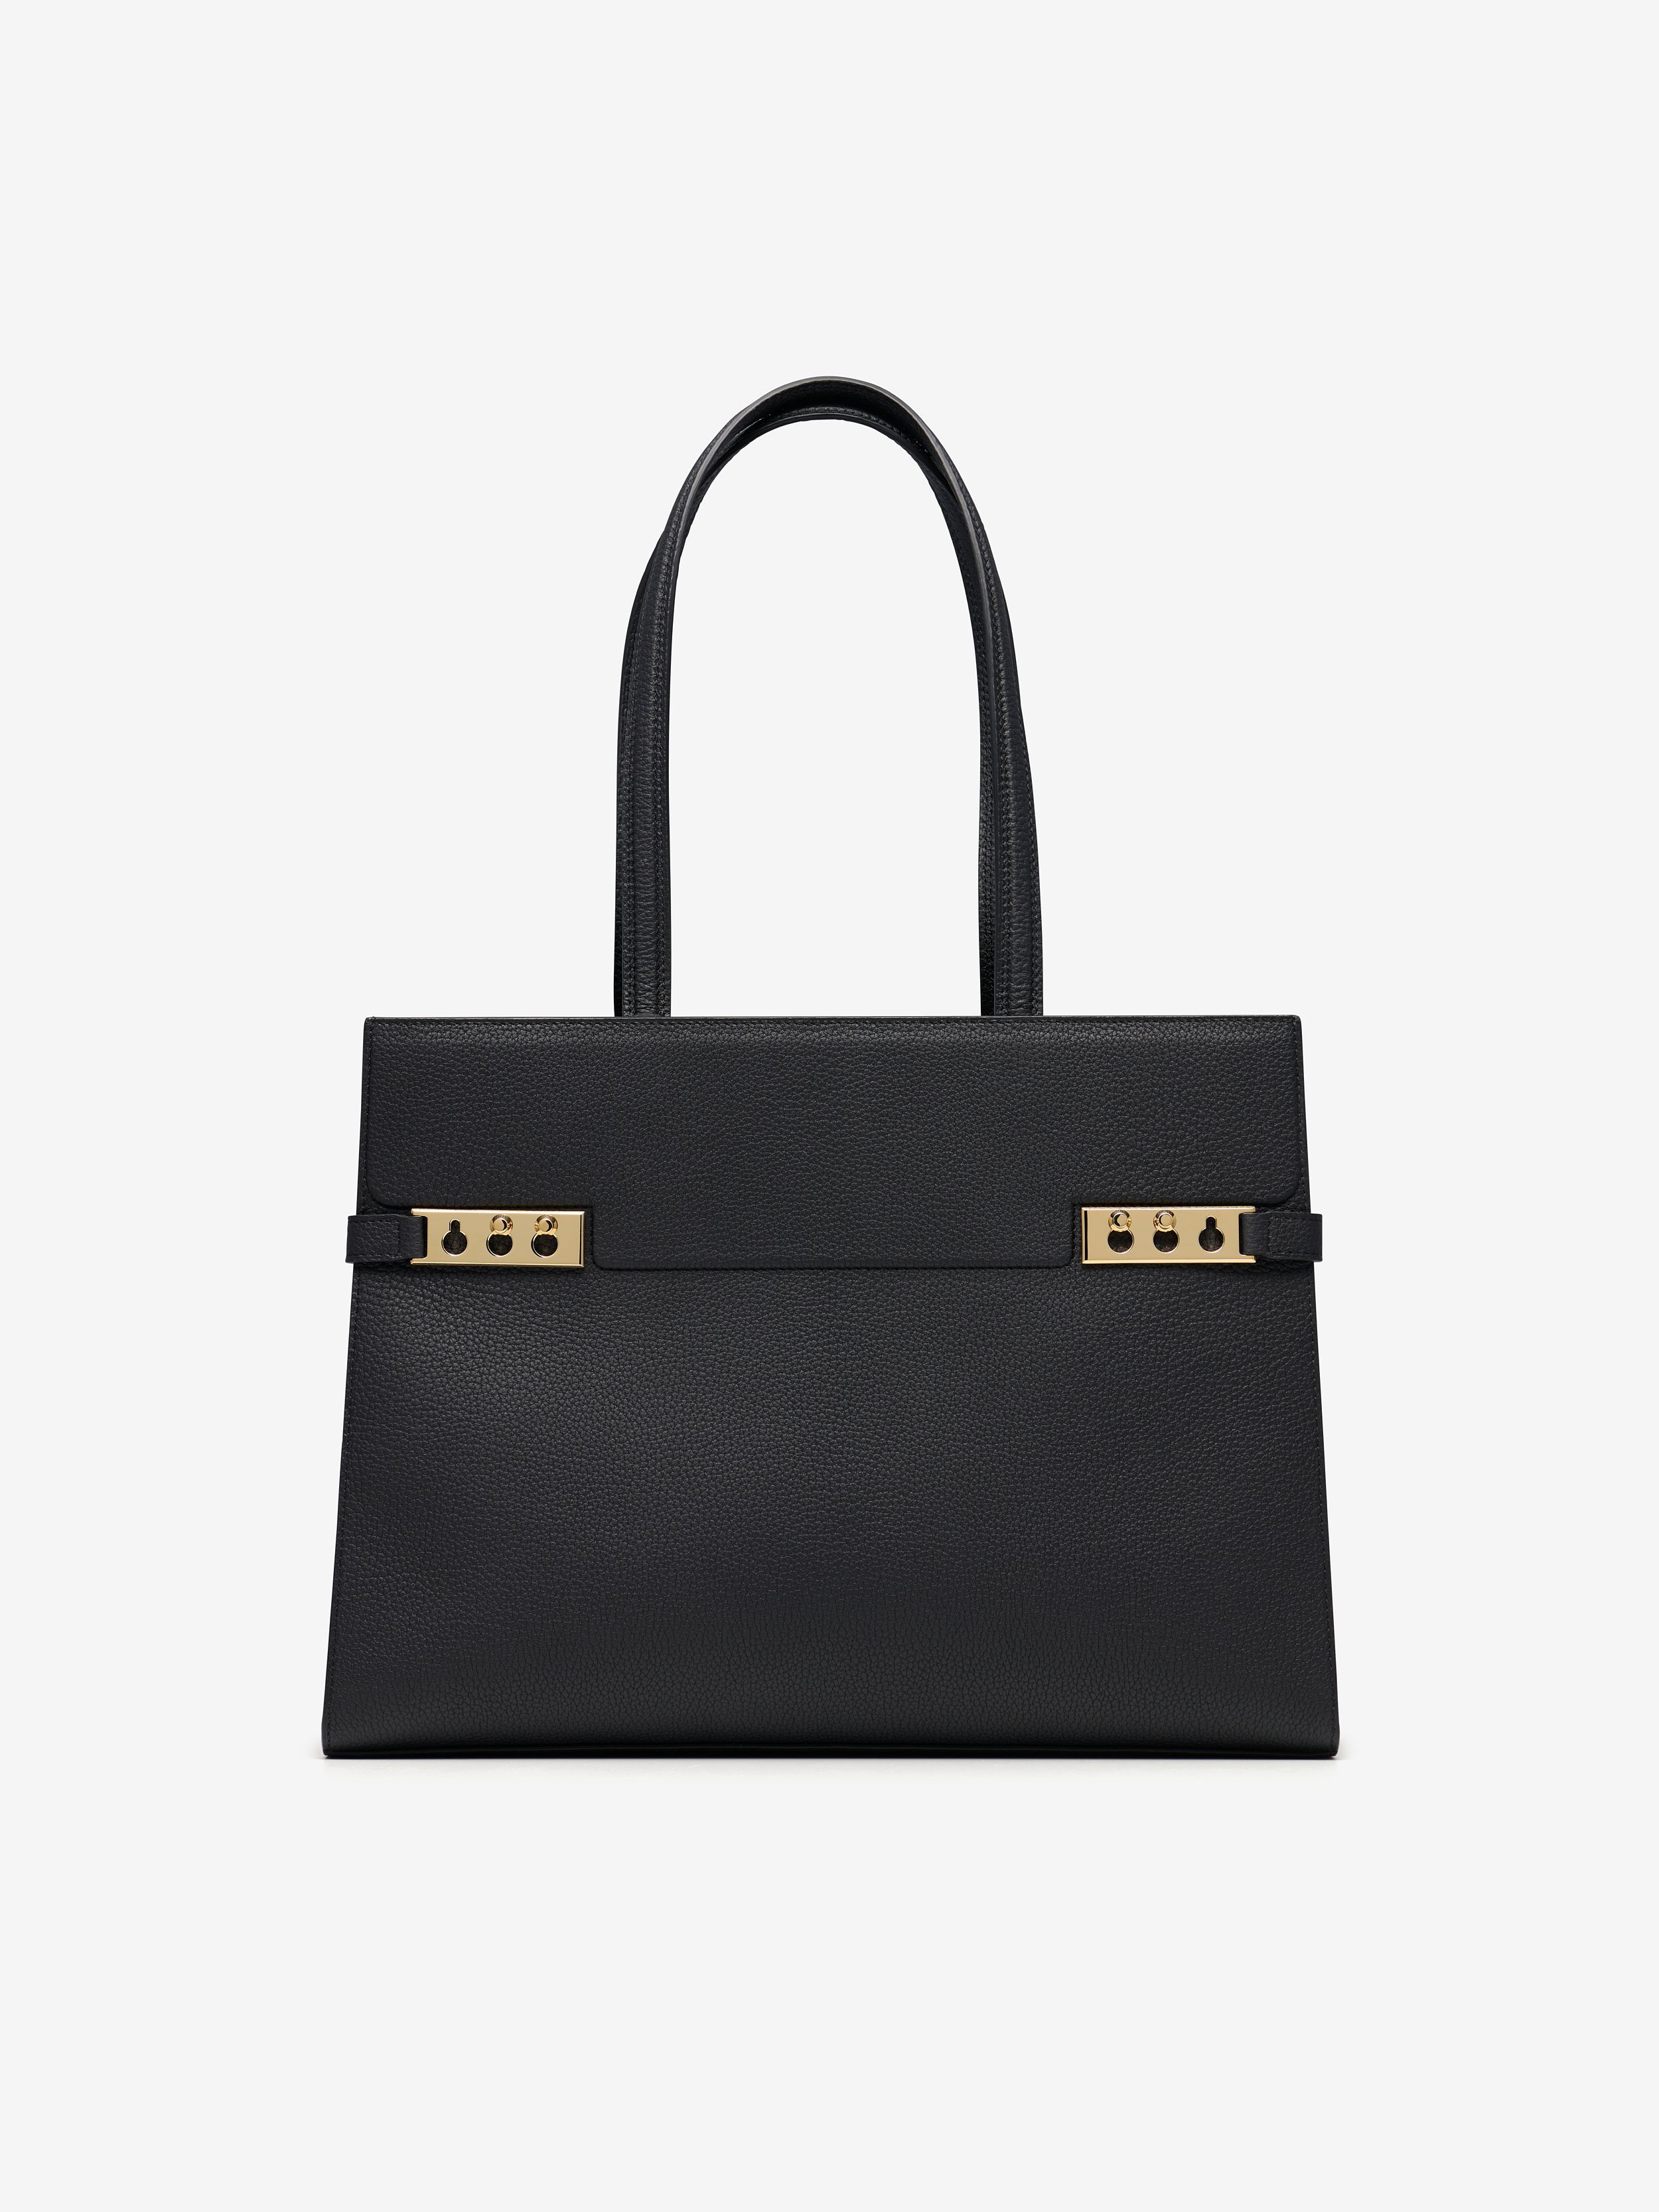 I've struck up a rapport with a Delvaux sales associate over the last few  months, and I randomly texted her that I wish this 2018 bag still existed  because I'd love to